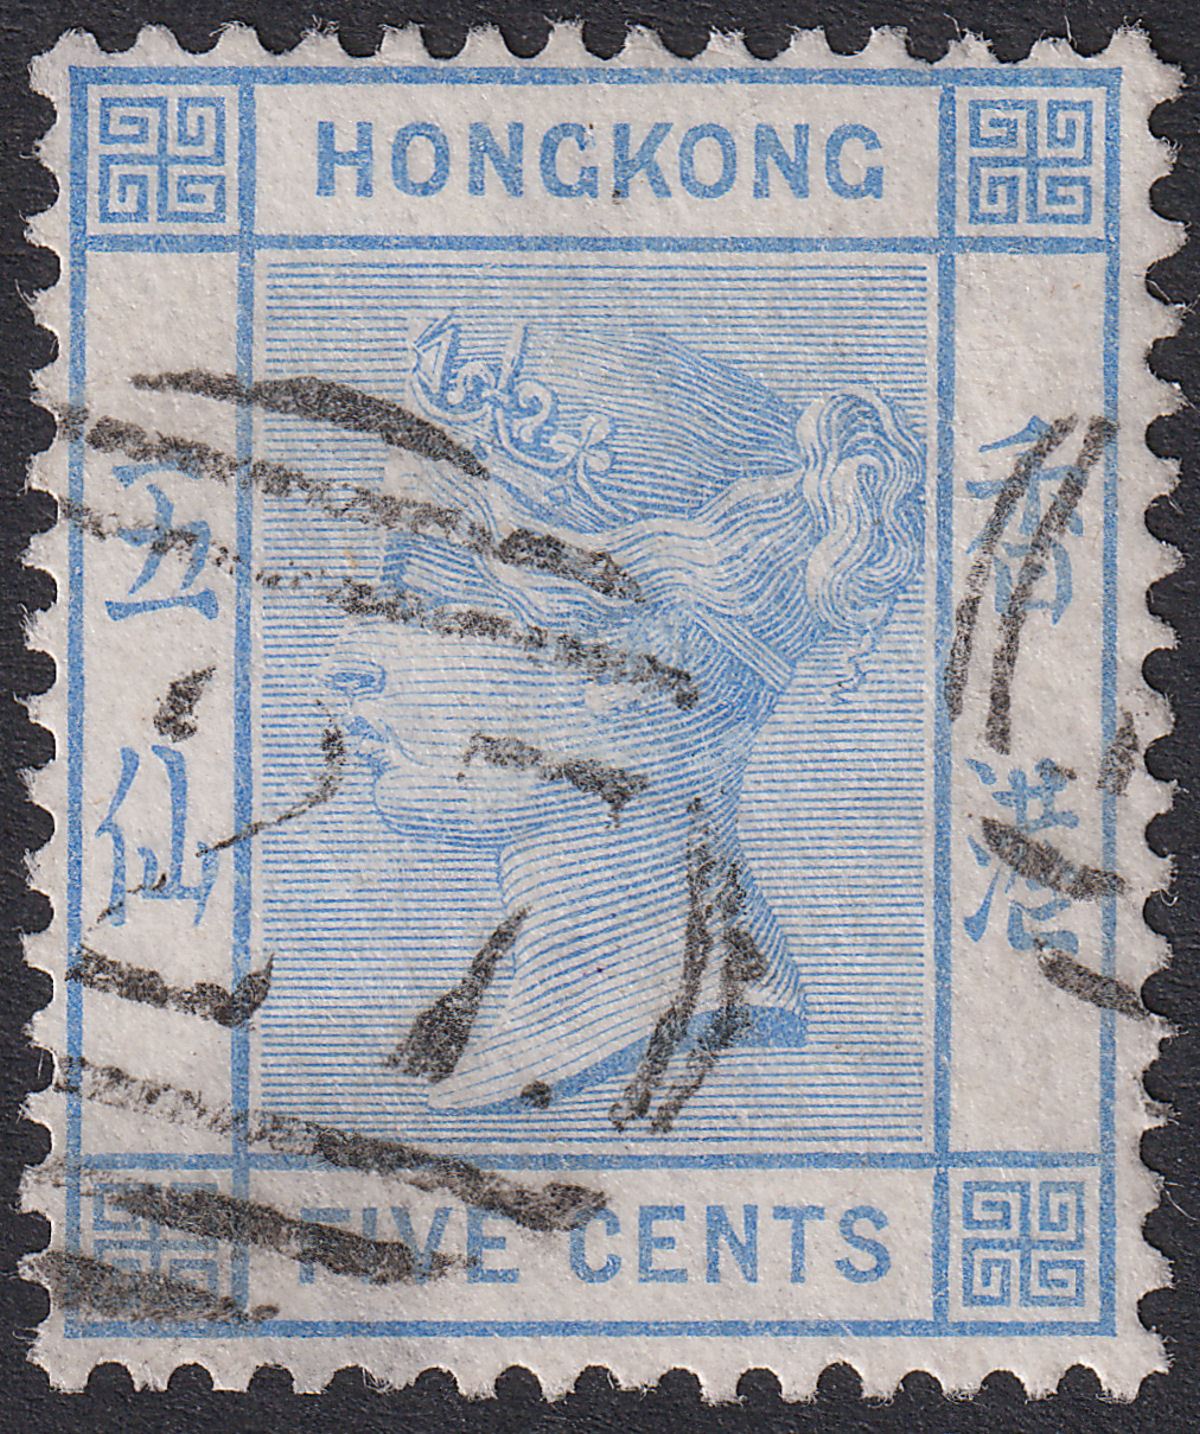 Hong Kong 1880 QV 5c Blue Used with D27 Postmark Amoy SG Z29 cat £100